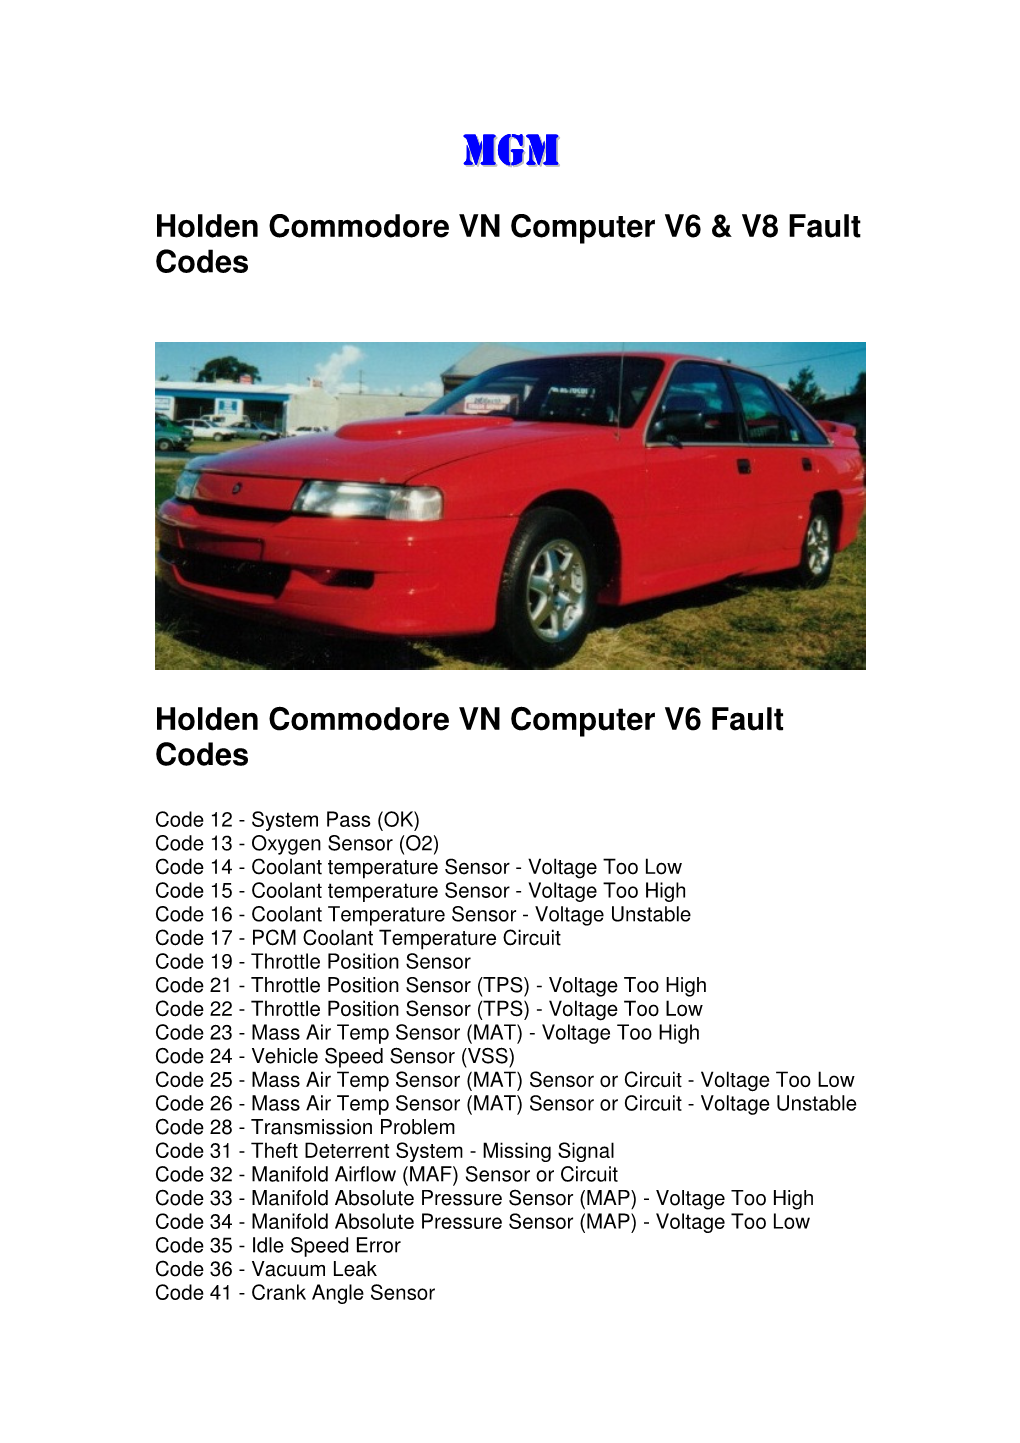 Holden Commodore VN Computer V8 Fault Codes